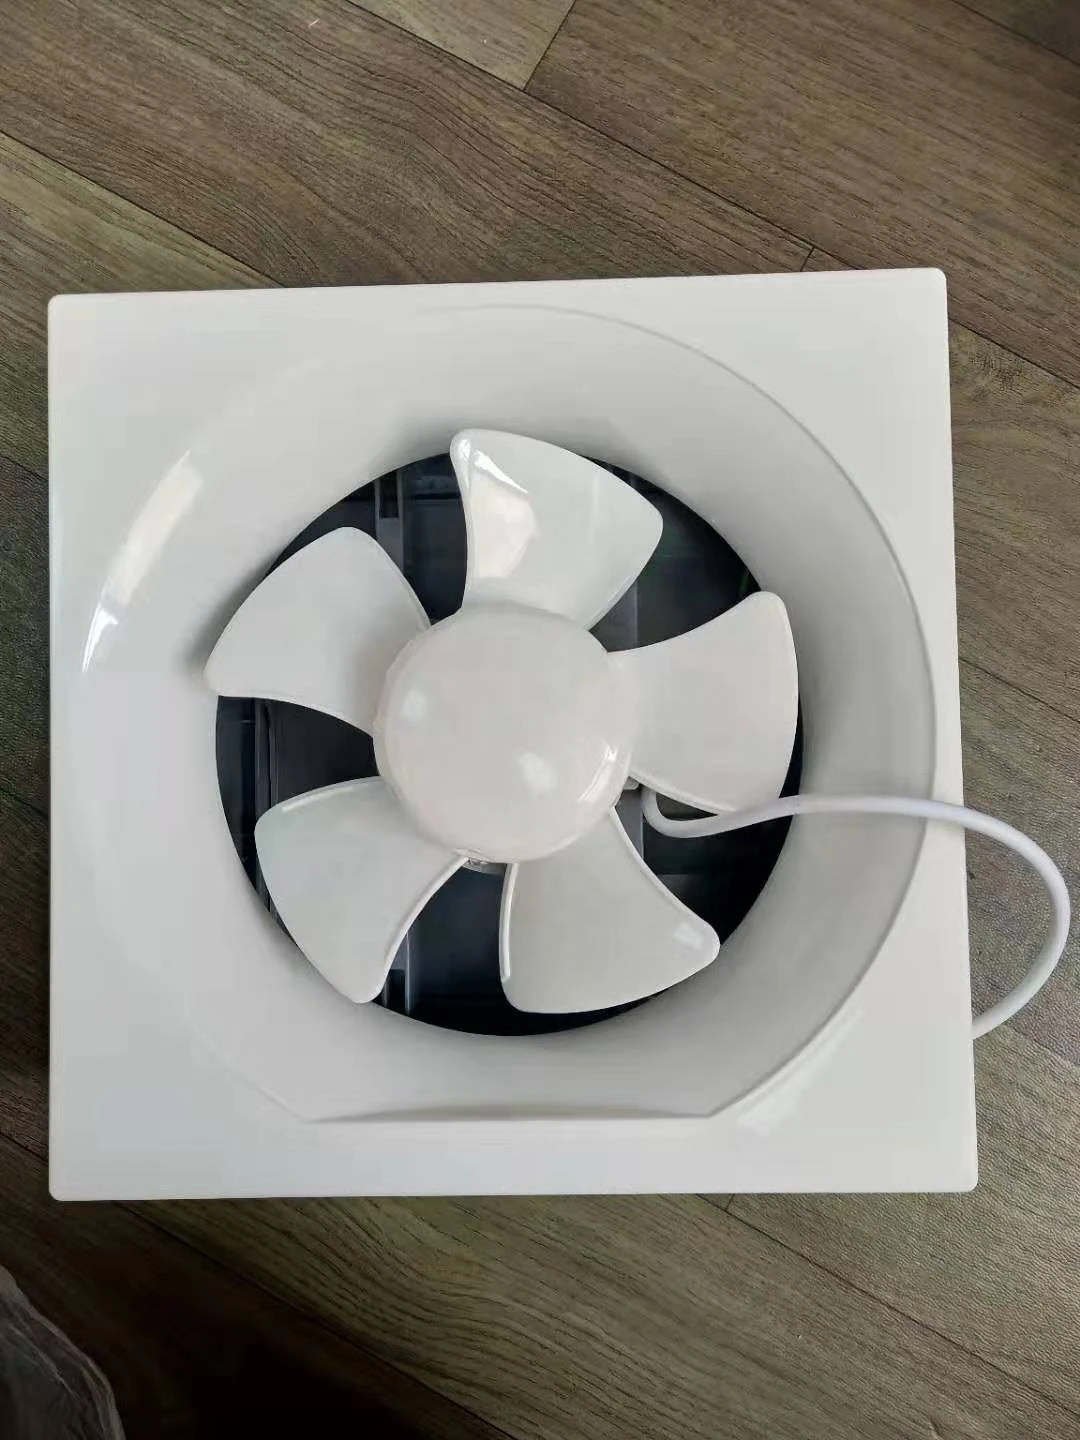 10&quot; kdk style two way exhaust fan jet fan ventilation full plastic 220v Ventilating centrifigal  With Shutter Extractor Fan